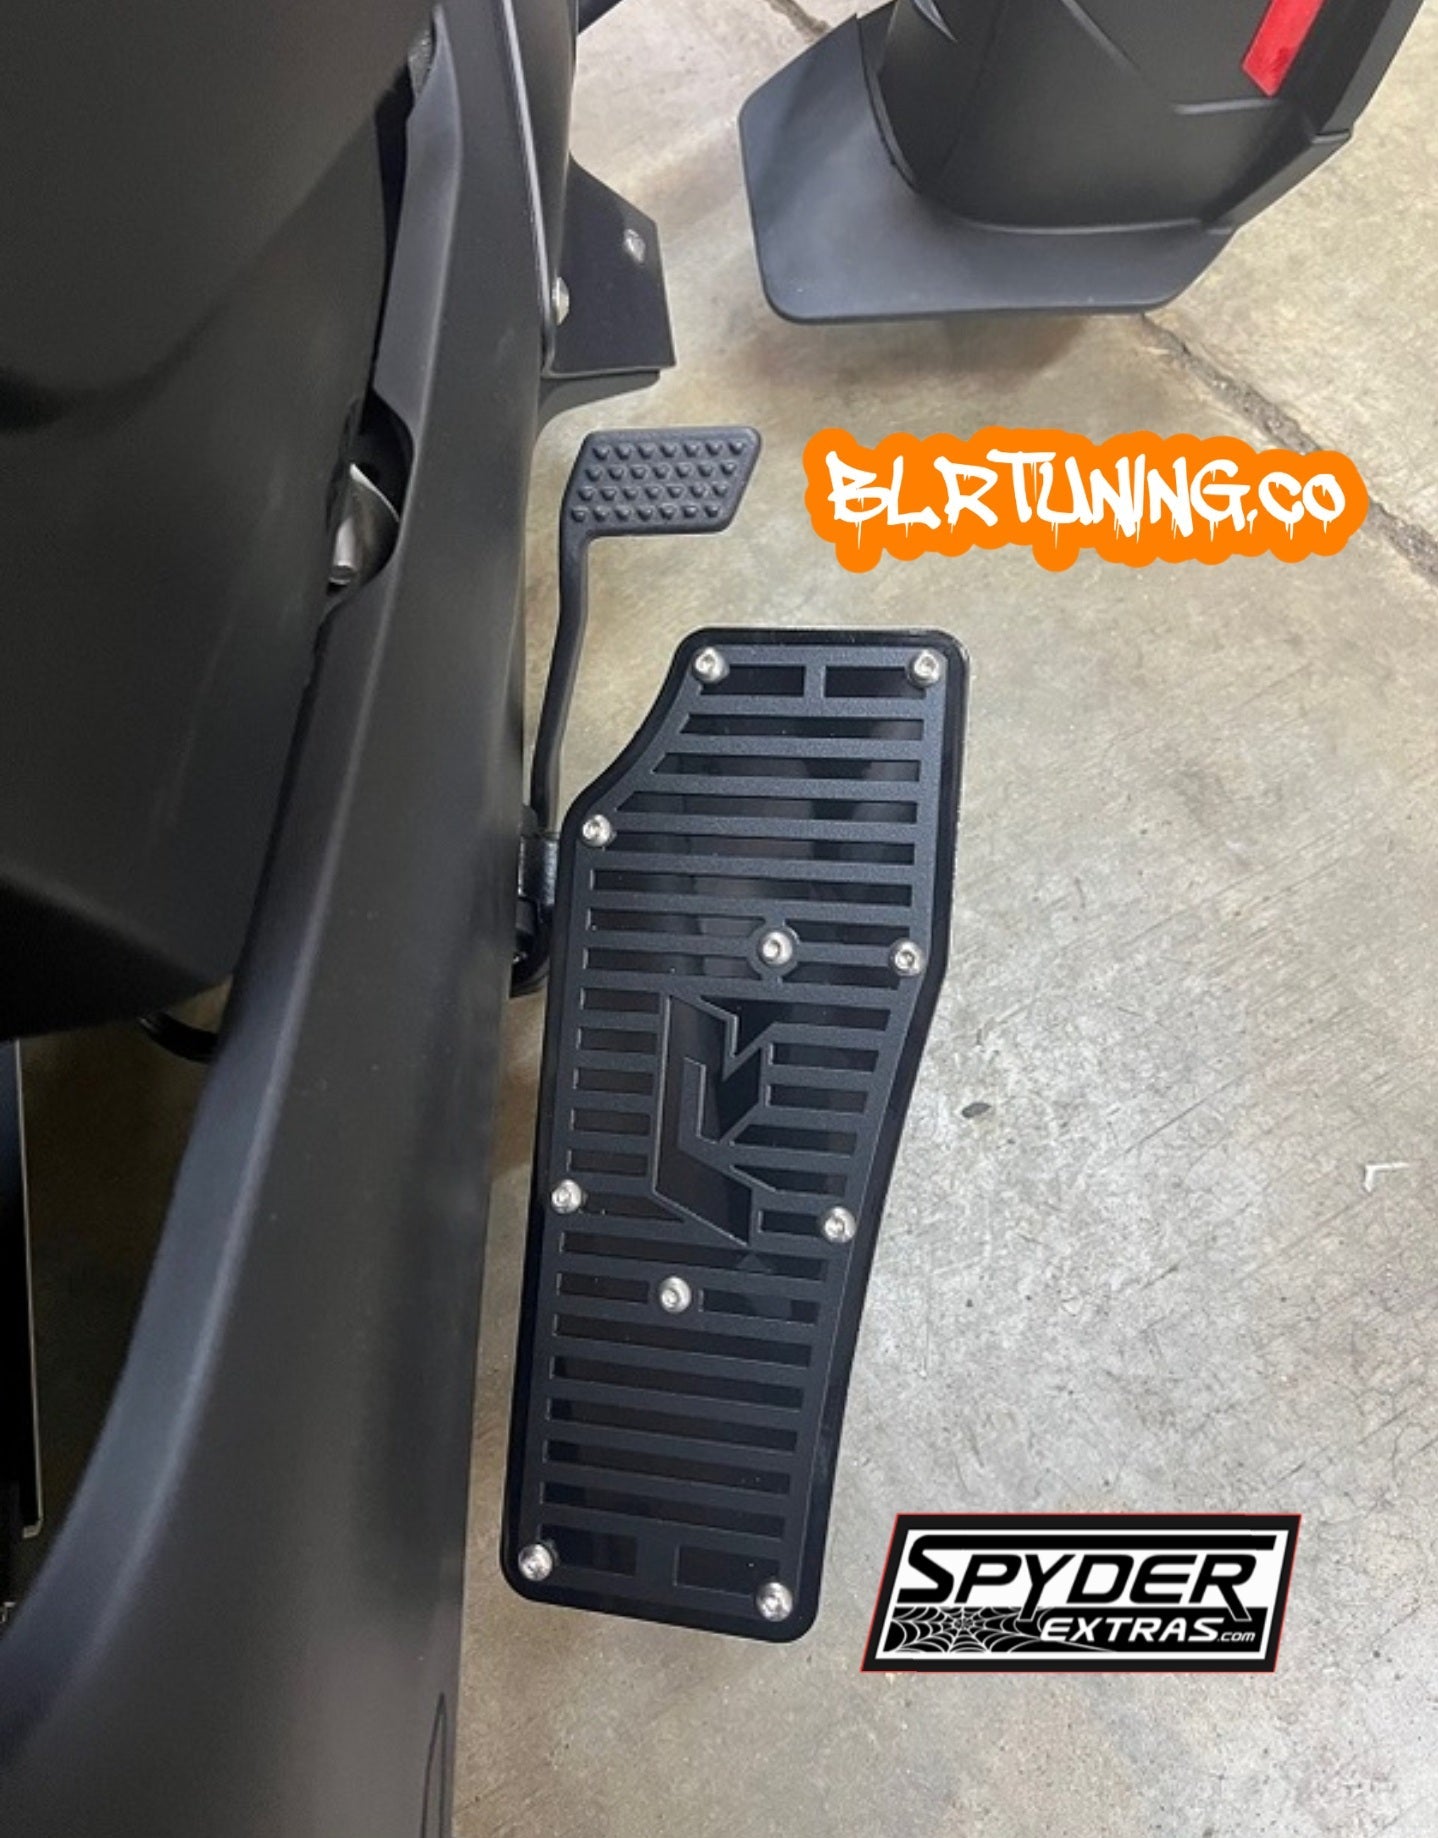 CAN-AM RYKER RALLY 2022 AND UP FULL SIZE BOLT ON DRIVER FLOORBOARDS